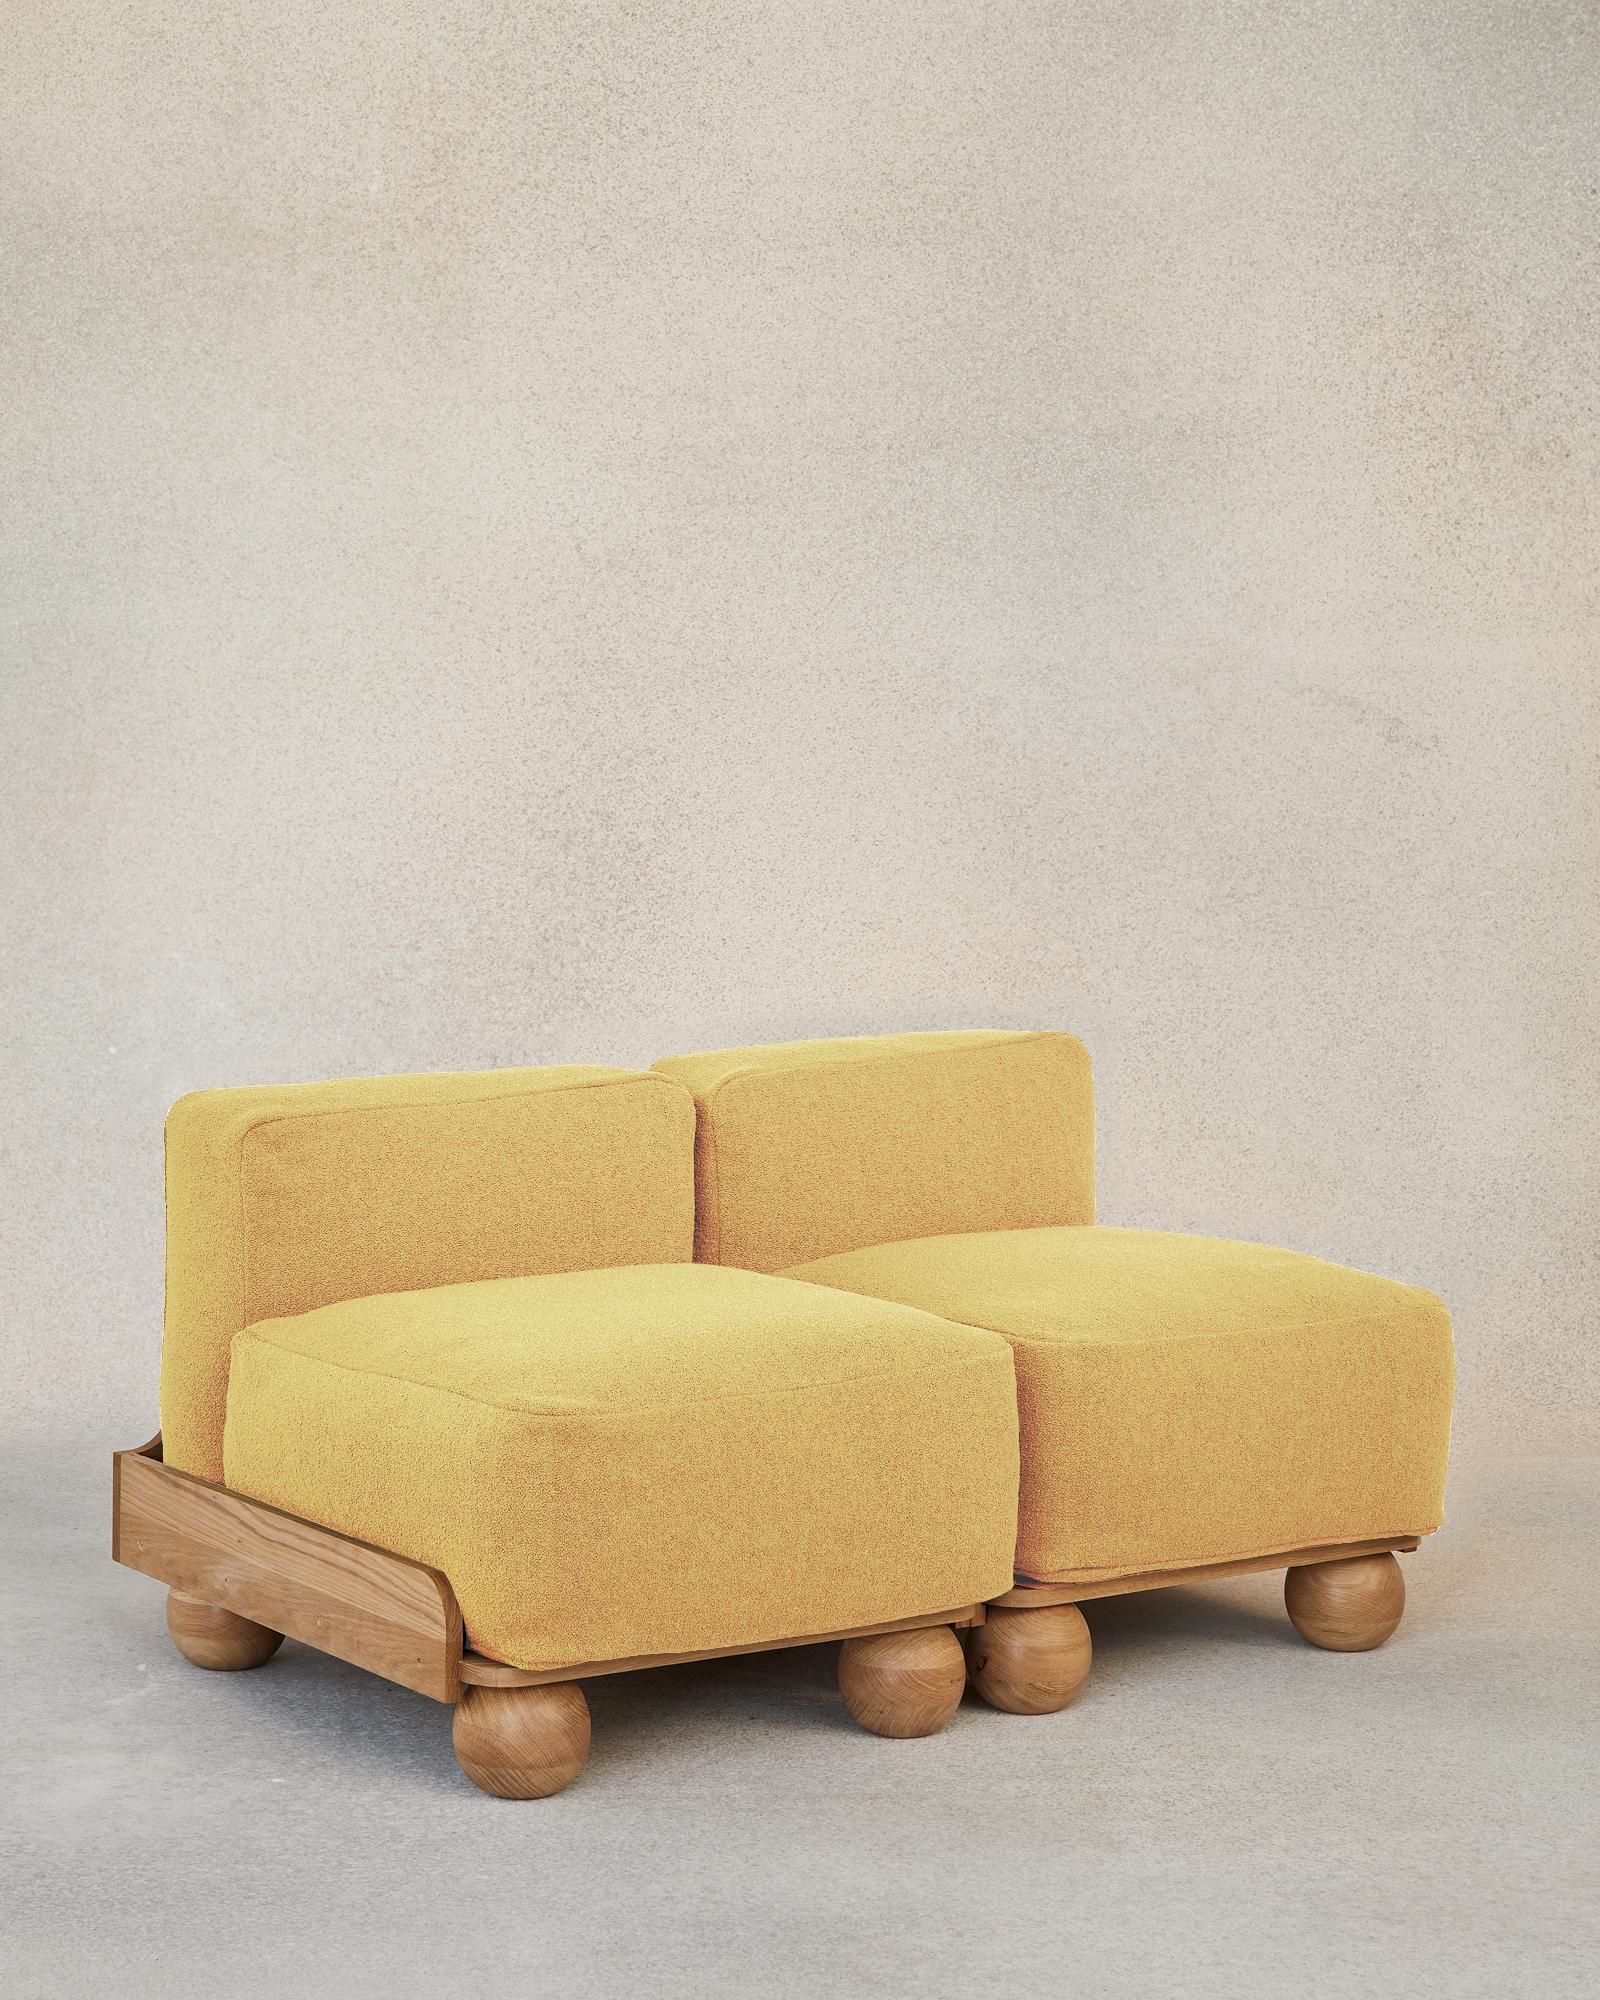 The Cove Slipper is a pared back armless seat designed to stand alone or join its modular family: combined into a sofa of any length or paired with the Cove Footstool to make a chaise lounge.

Like its Cove siblings, the Sipper reveals all its